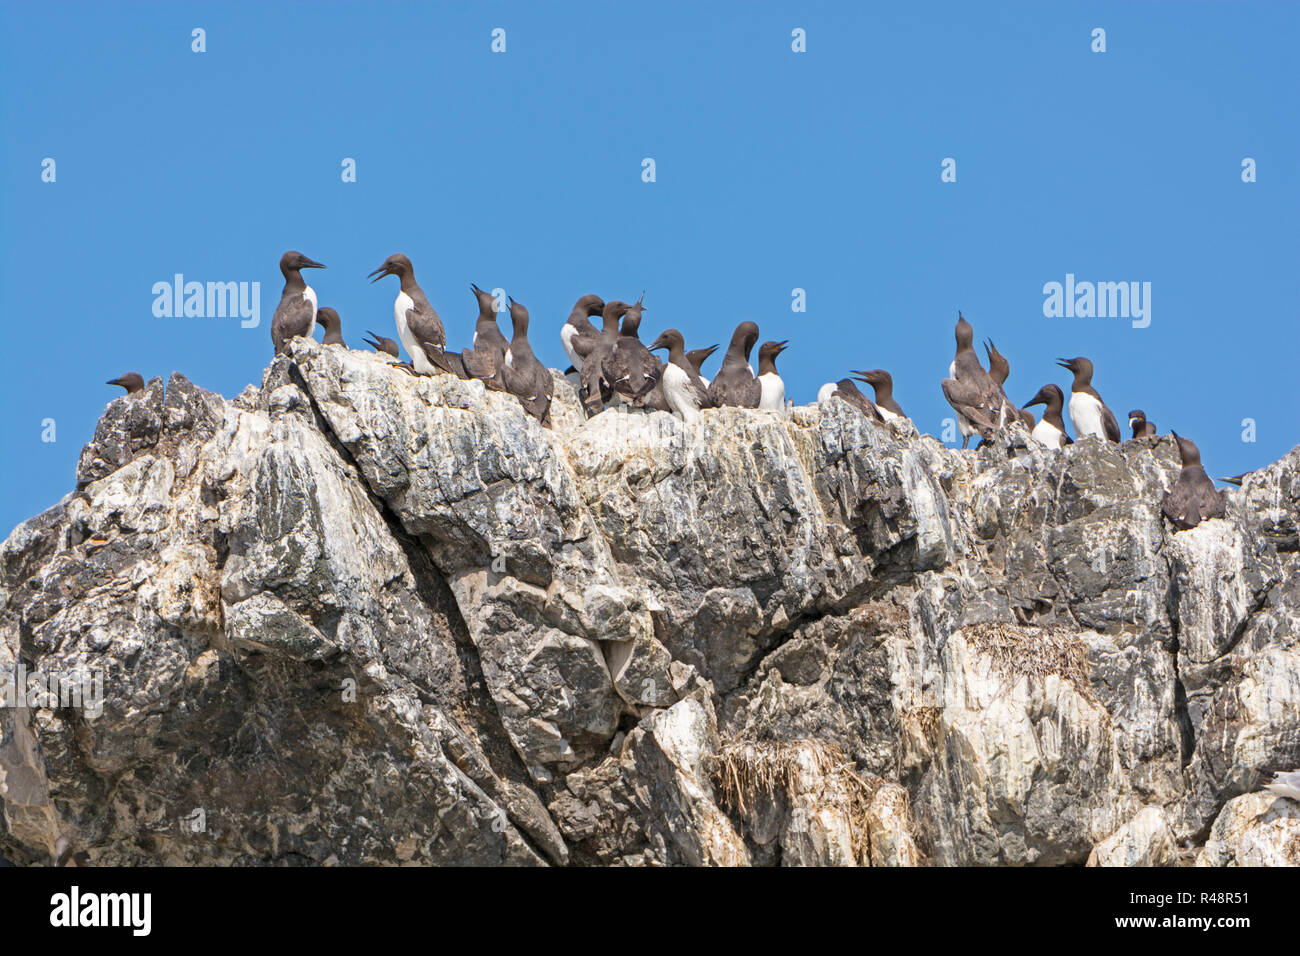 Common Murres on a Rocky Cliff Stock Photo